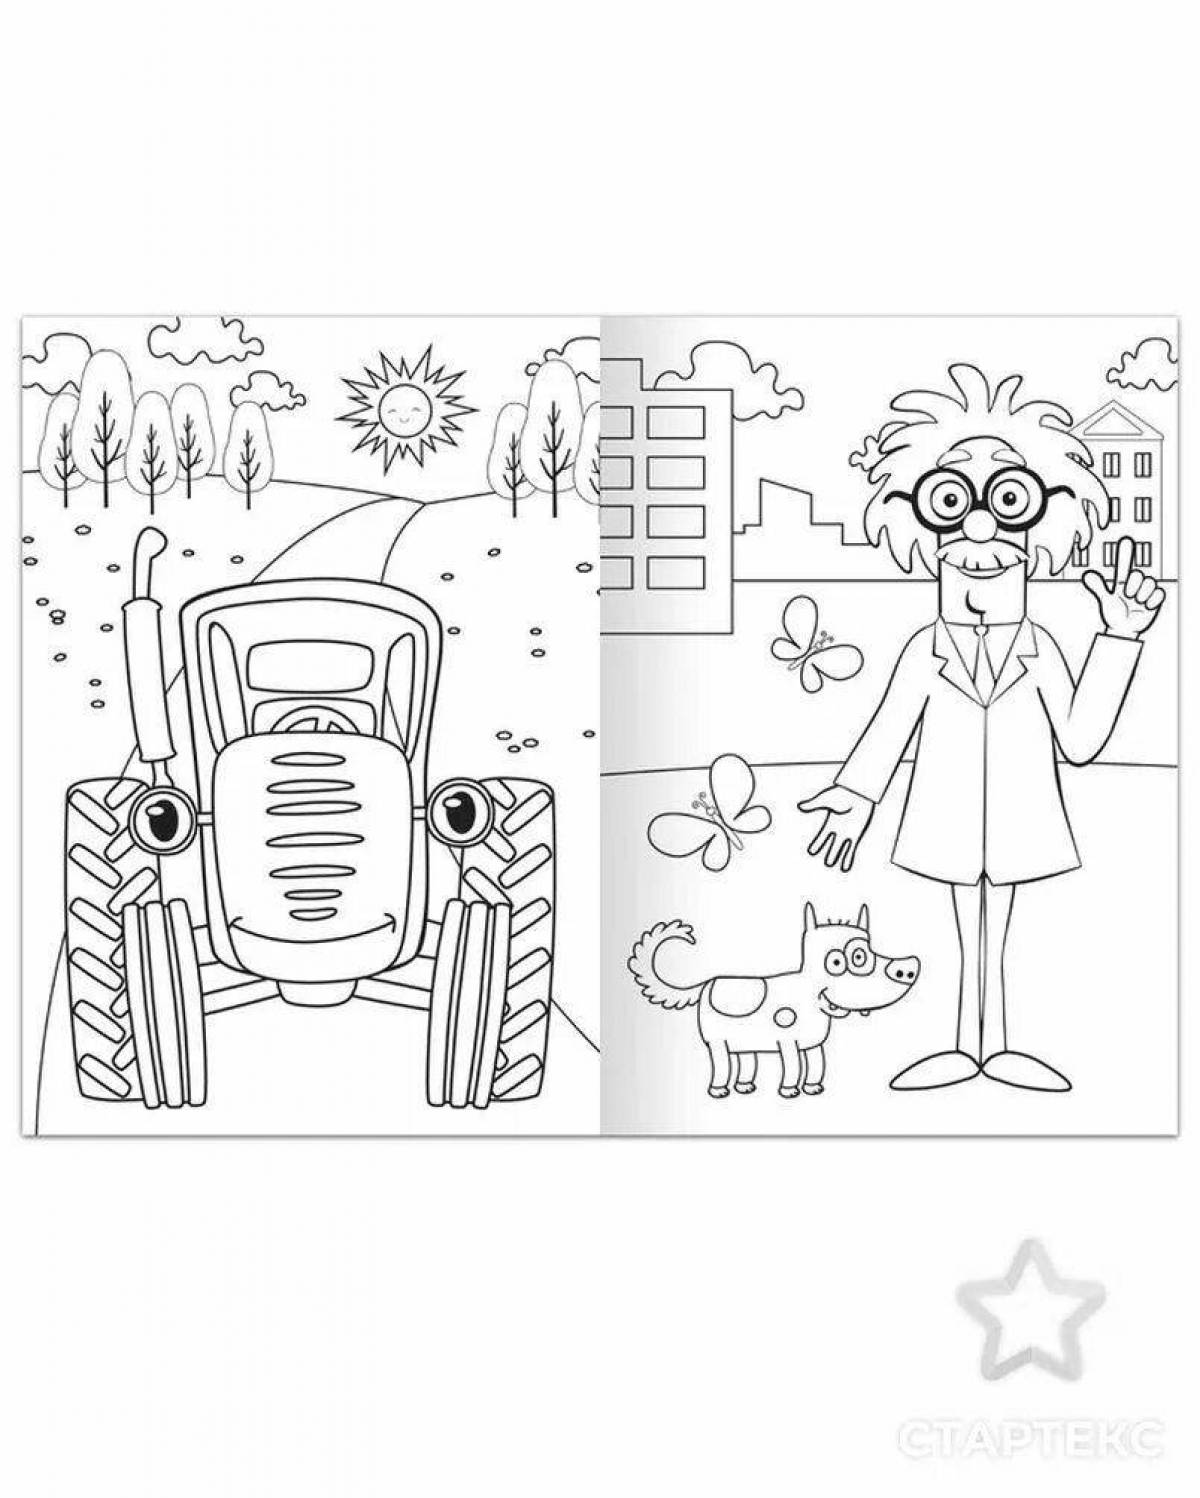 Fantastic blue tractor coloring book for little ones